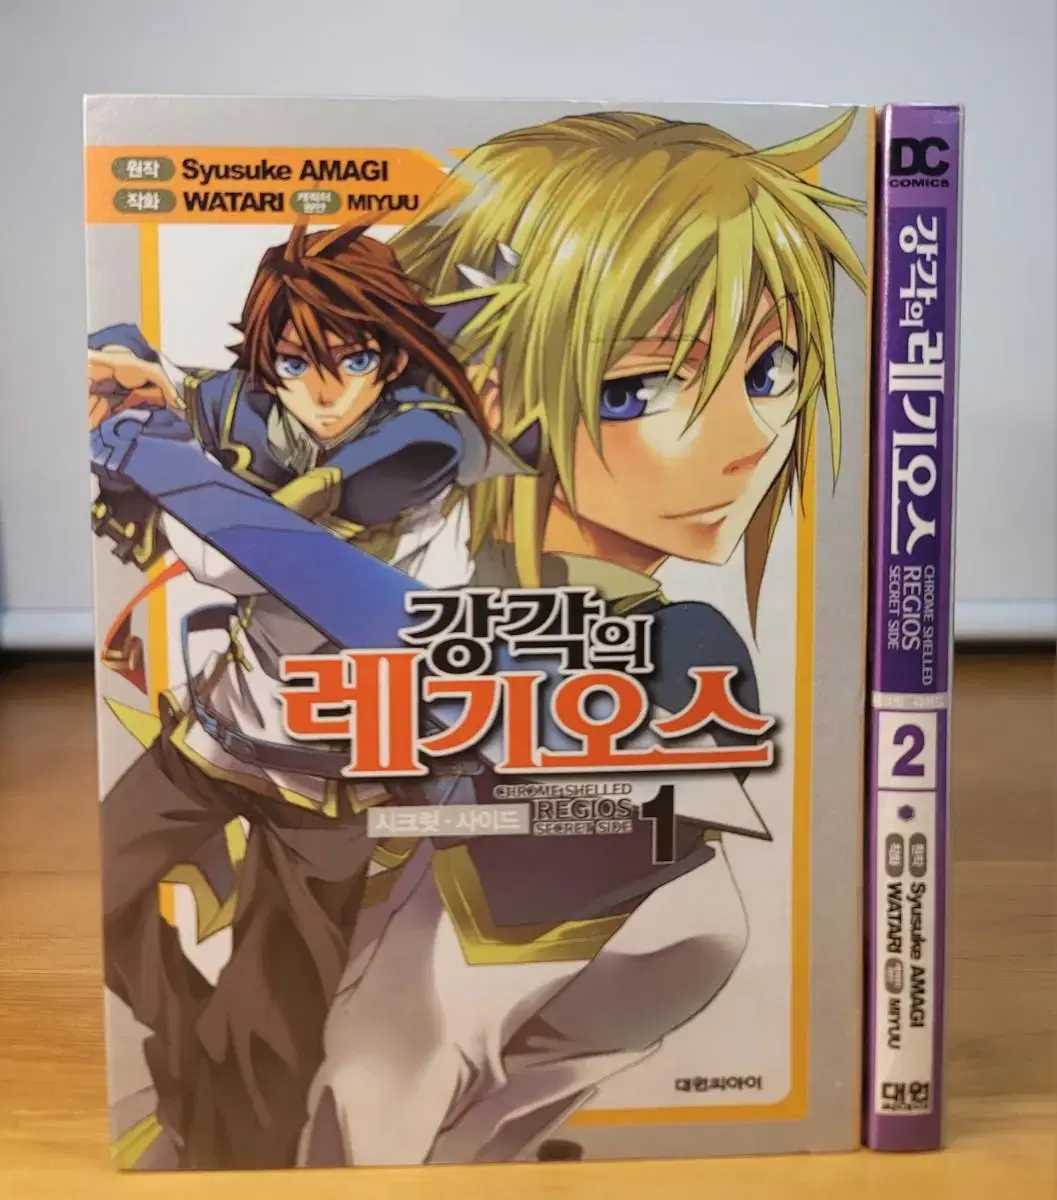 Chrome Shelled REGIOS Character Songs -The First Session- — Chrome Shelled